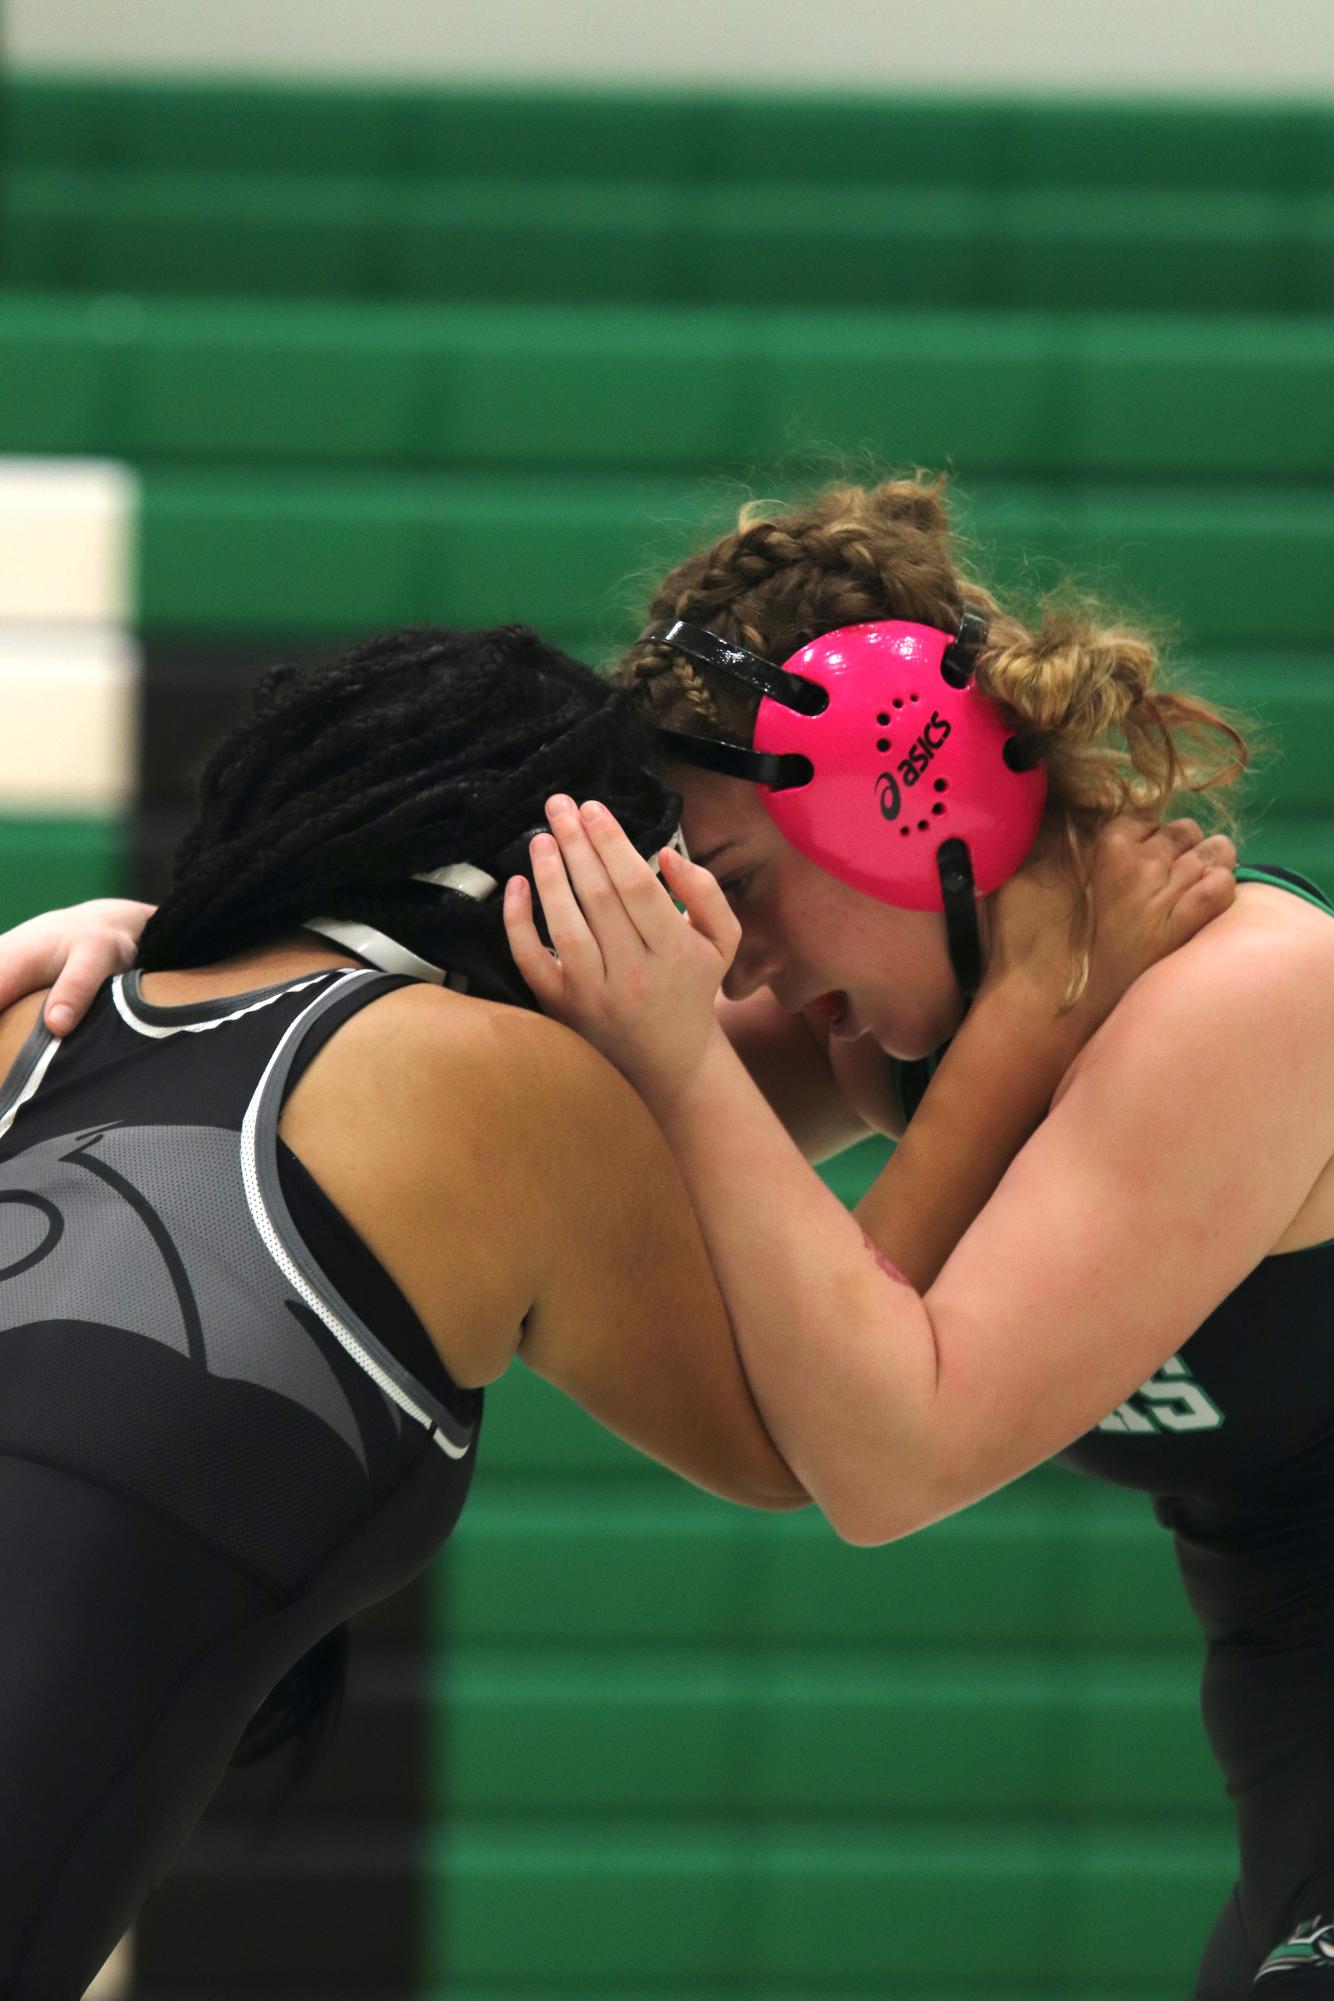 Varsity+wrestling+vs.+Salina+South+and+Campus+%28Photos+by+Leana+Tuttle%29